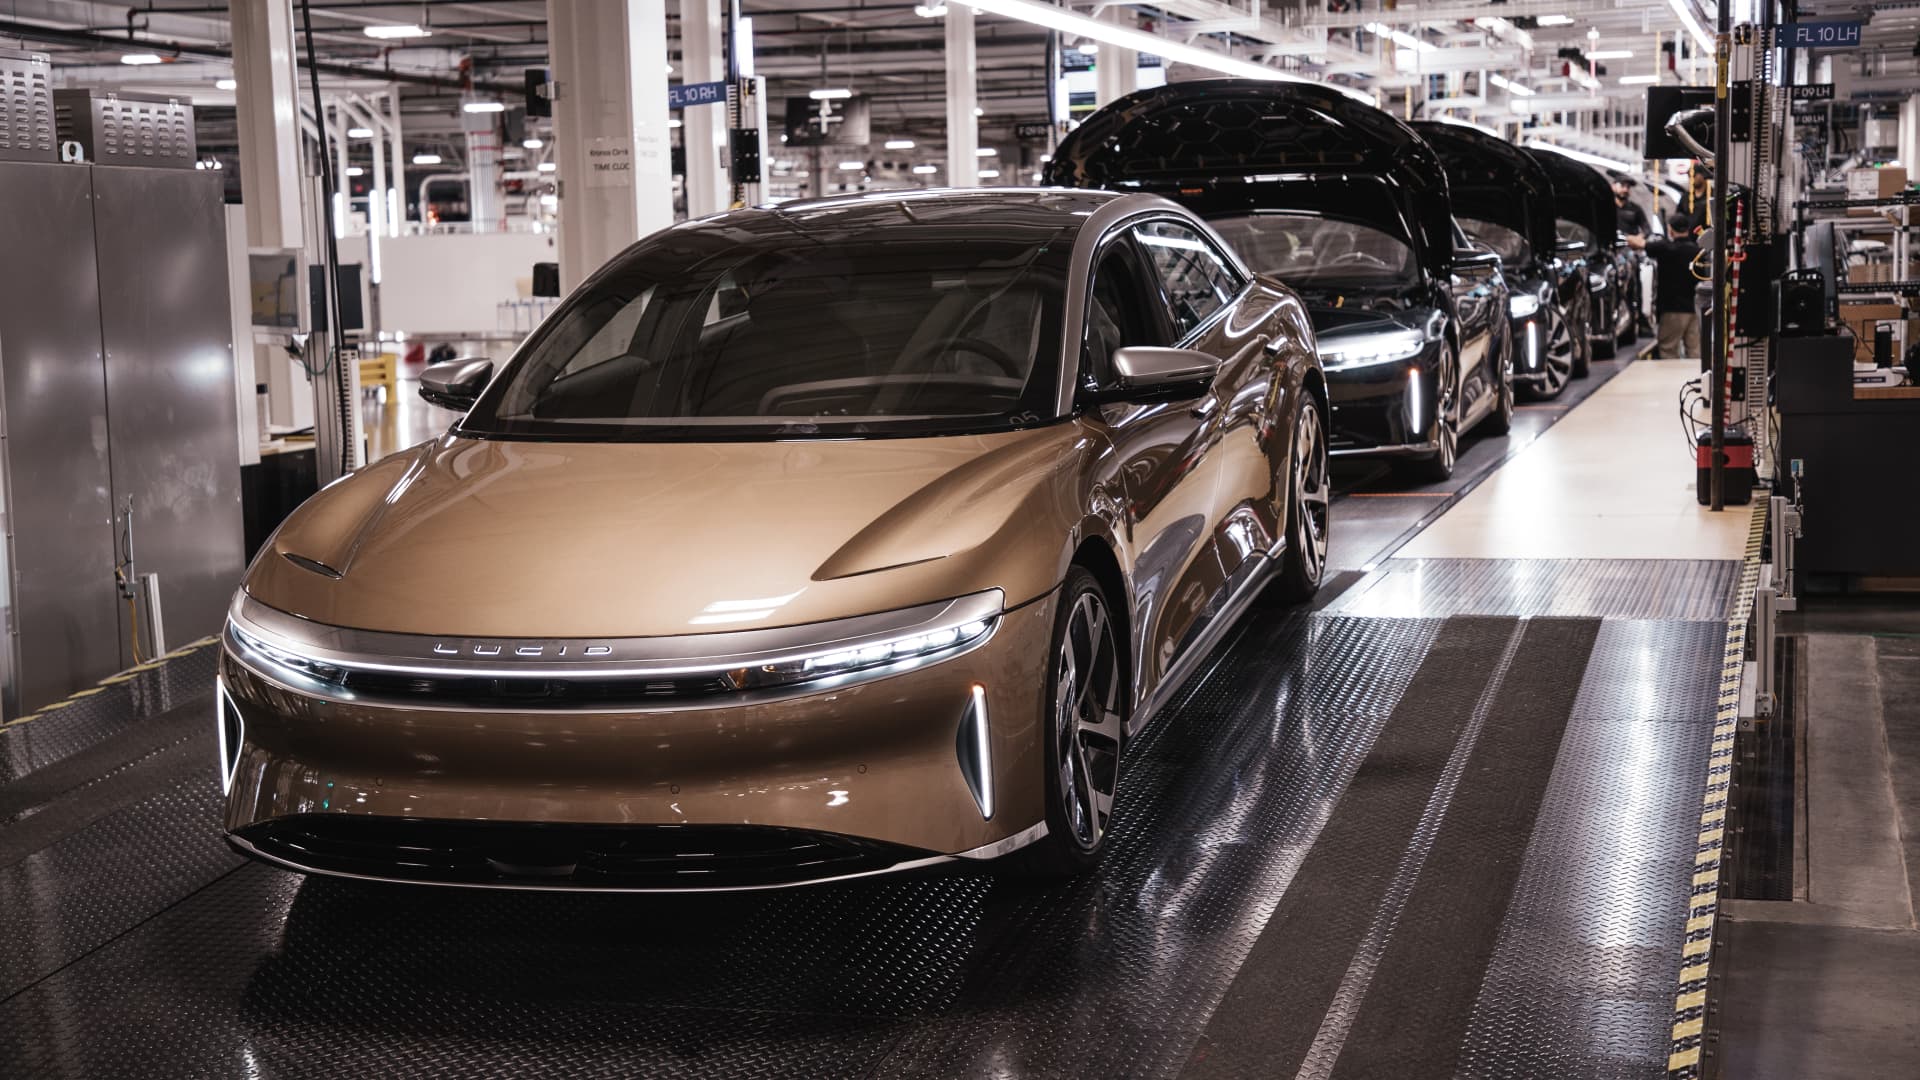 Lucid EV production on track to meet 2022 guidance